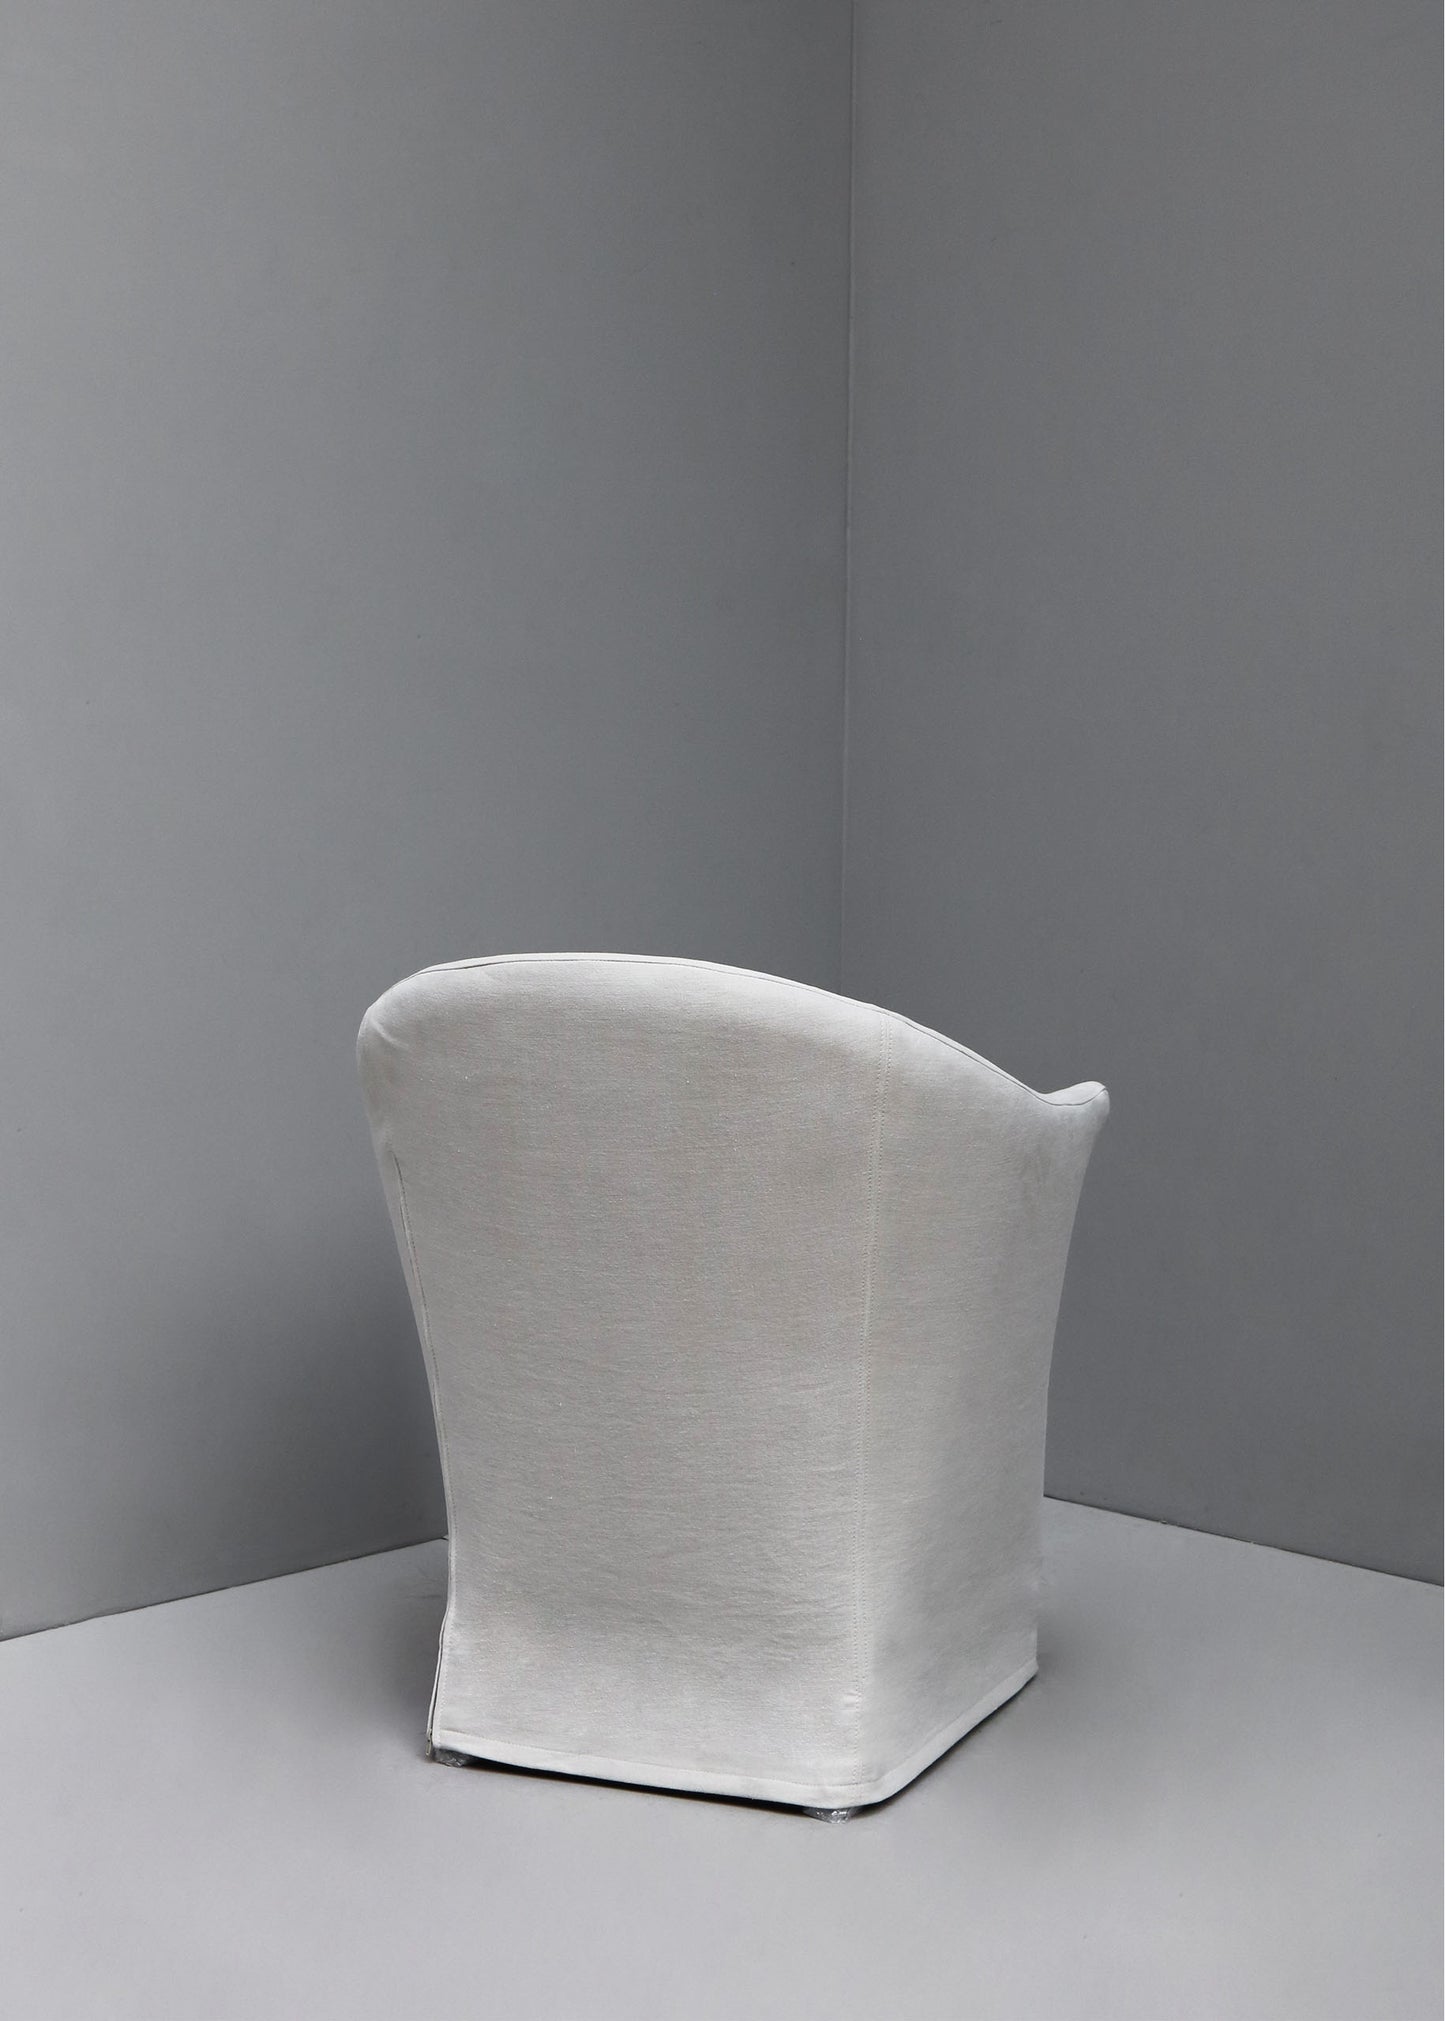 "ROUND DINING ARMCHAIR" BY OLIVER GUSTAV